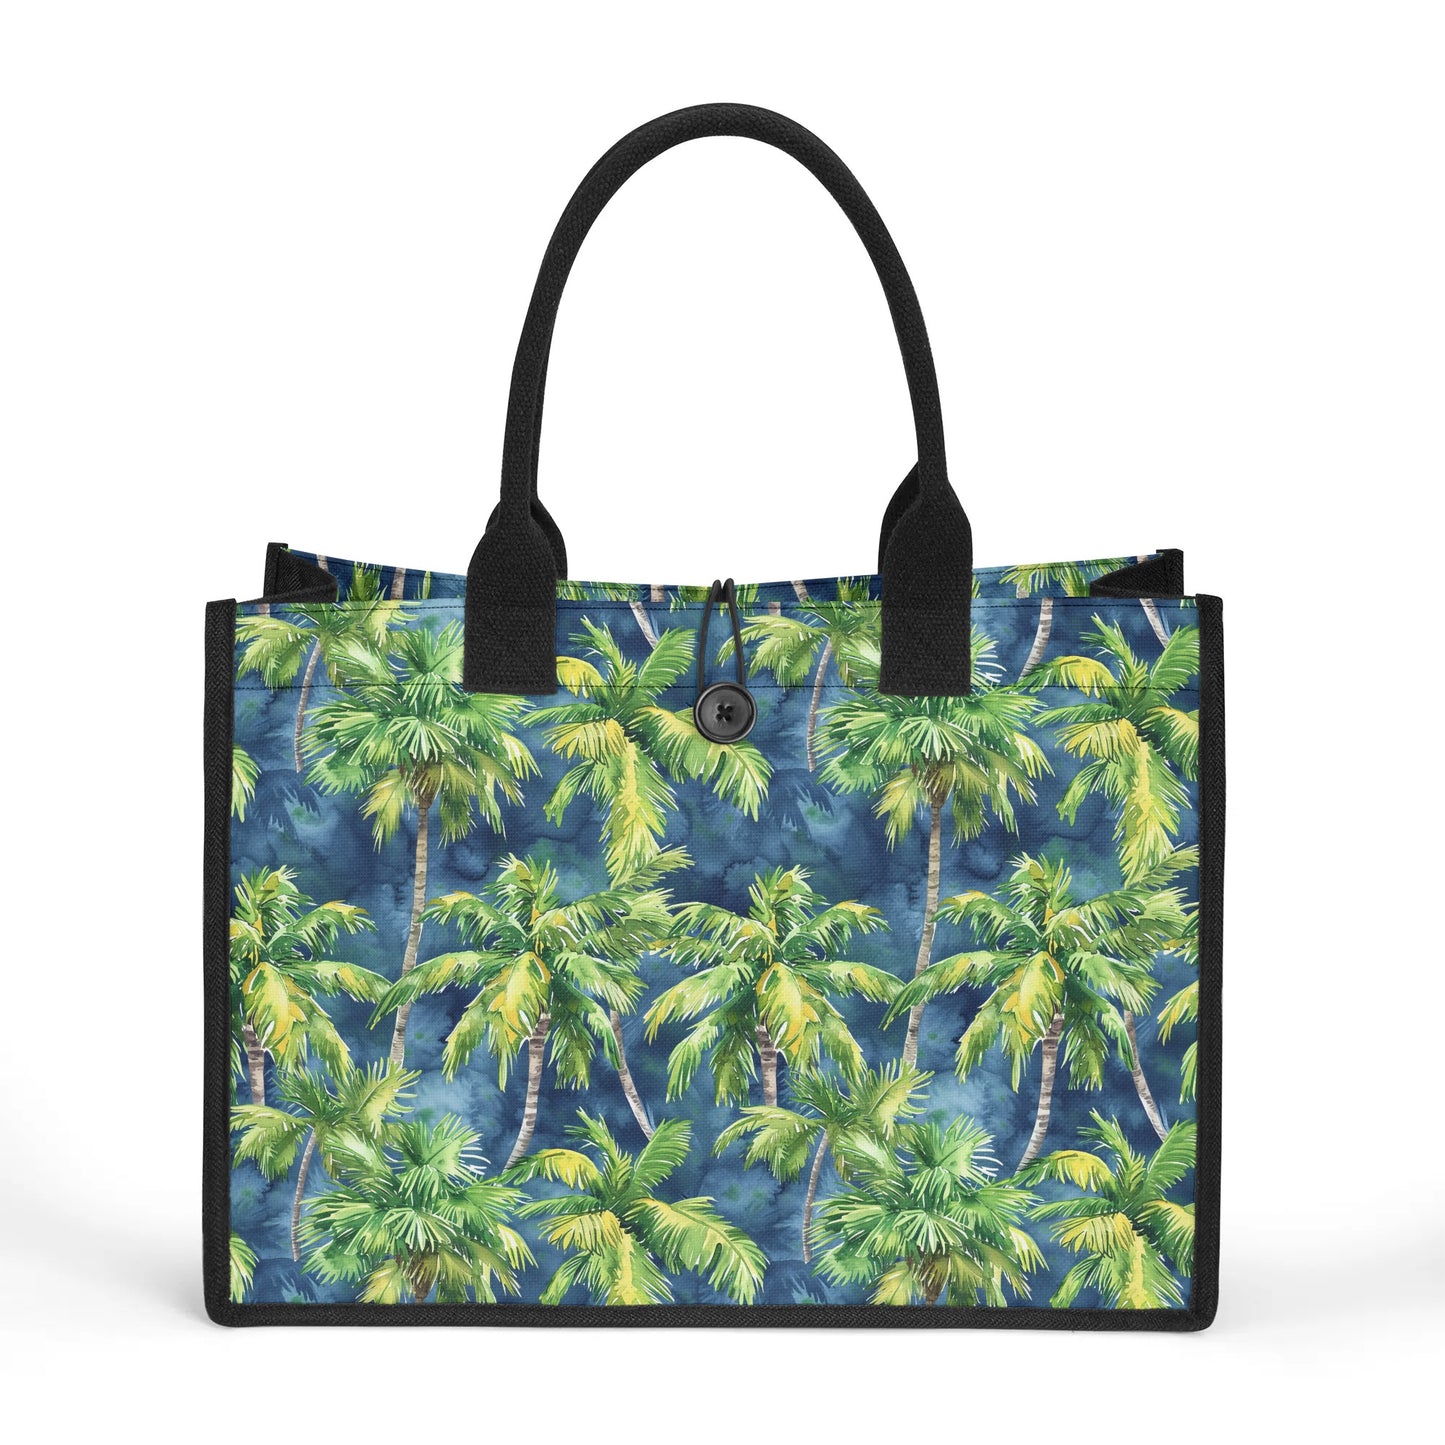 Midnight Palms: Silhouetted Palm Trees Against a Nighttime Sky Structured Button Closure Canvas Tote Bag in 2 Sizes